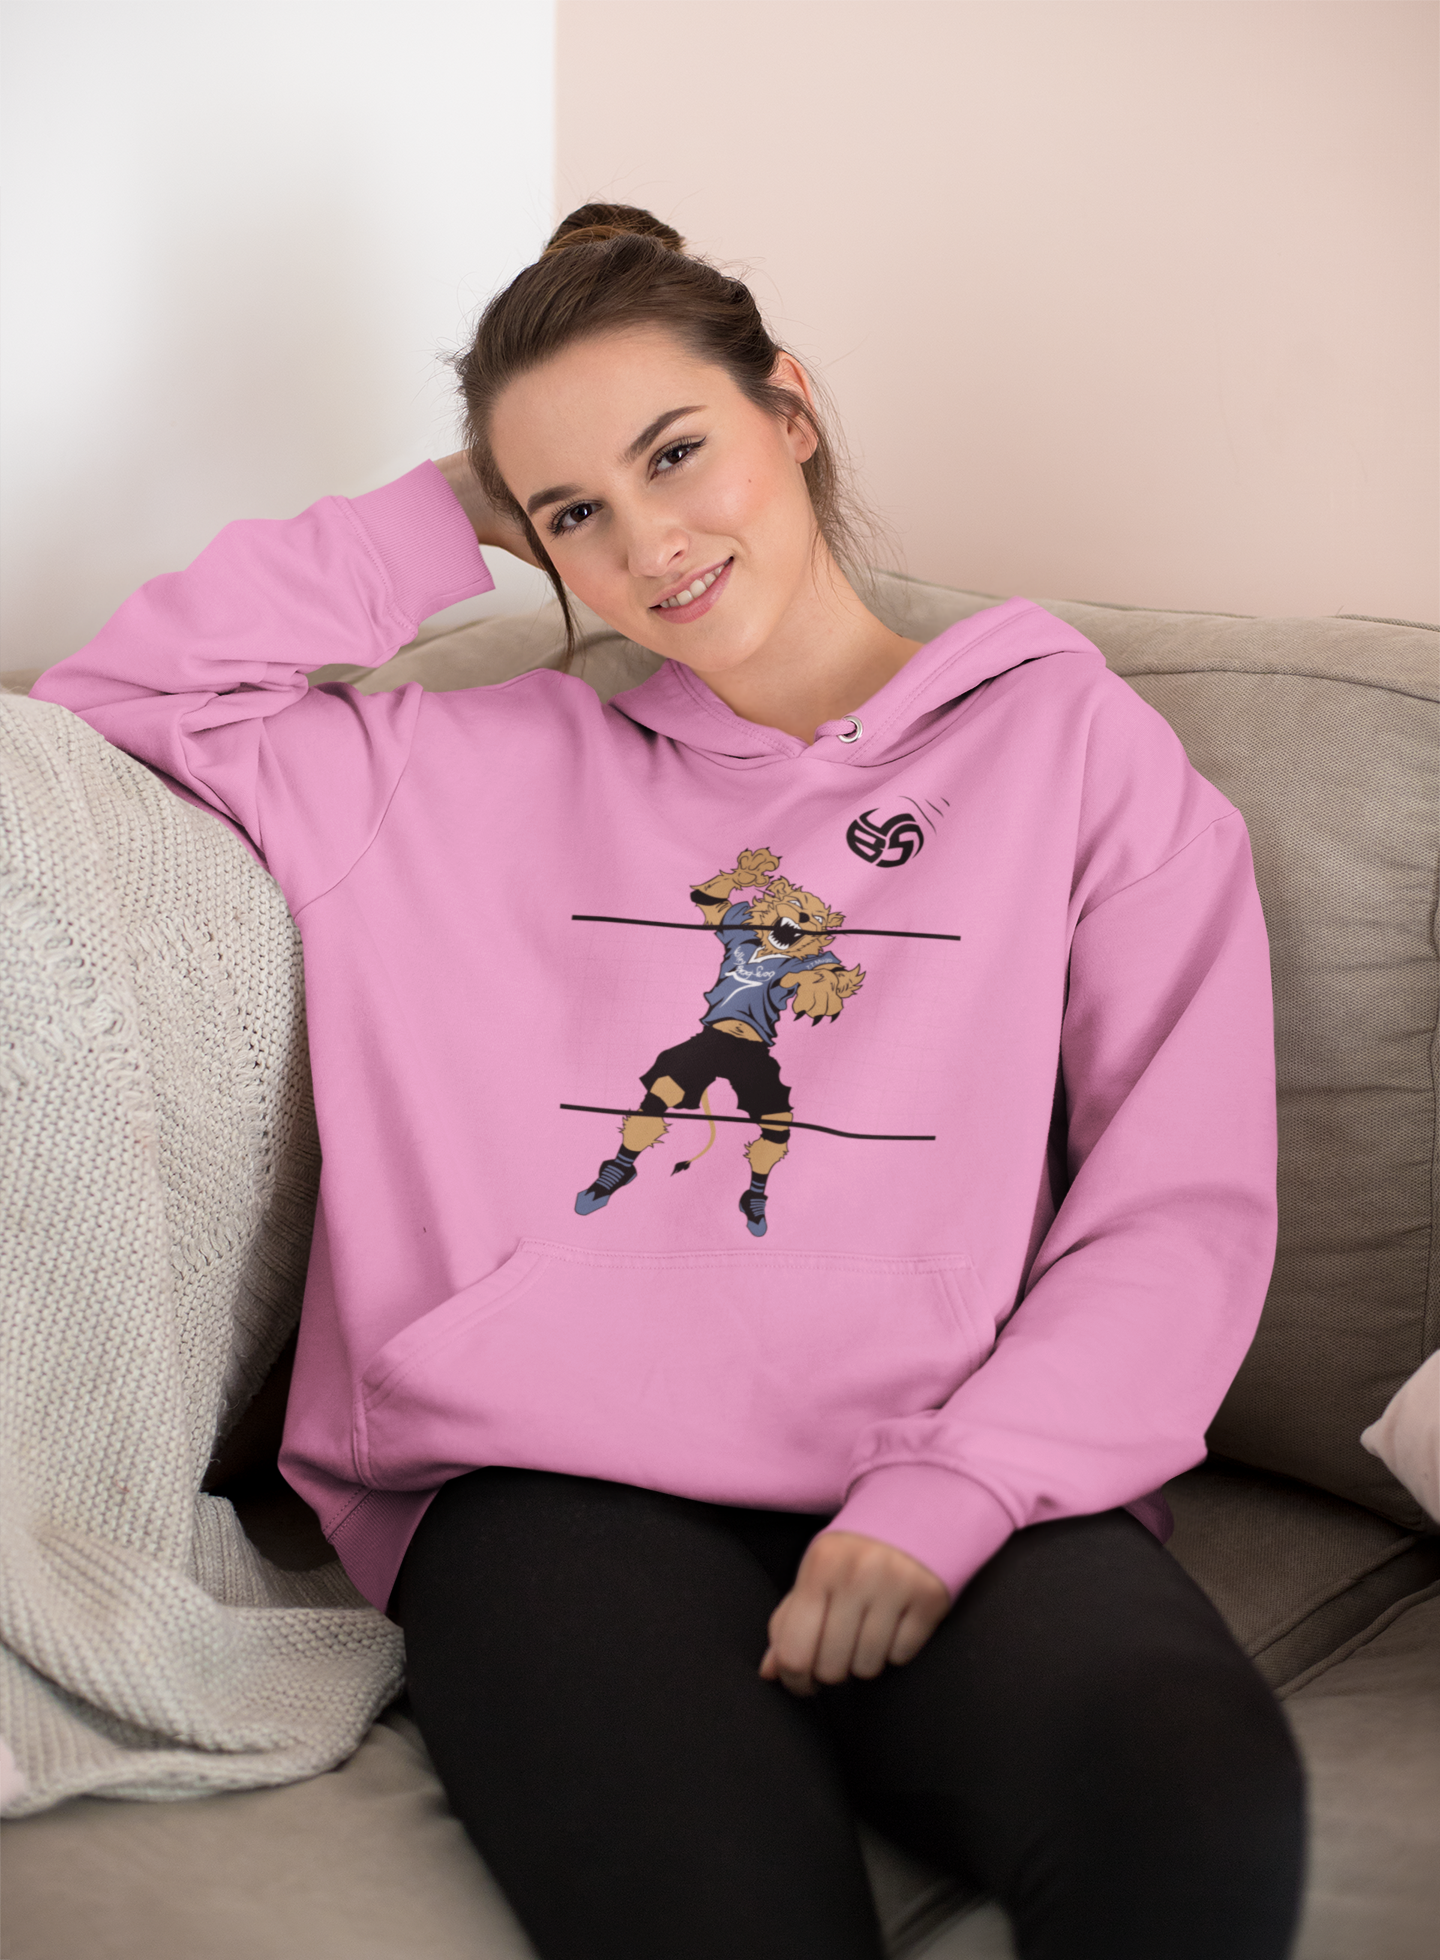 One of my three collections of Volleybragswag volleyball hoodie designs feature beast volleyball players representing each of the six basic volleyball skills.

The name speaks for itself. T.T. Mugb is short for “Things That Make You Go “BOOM”